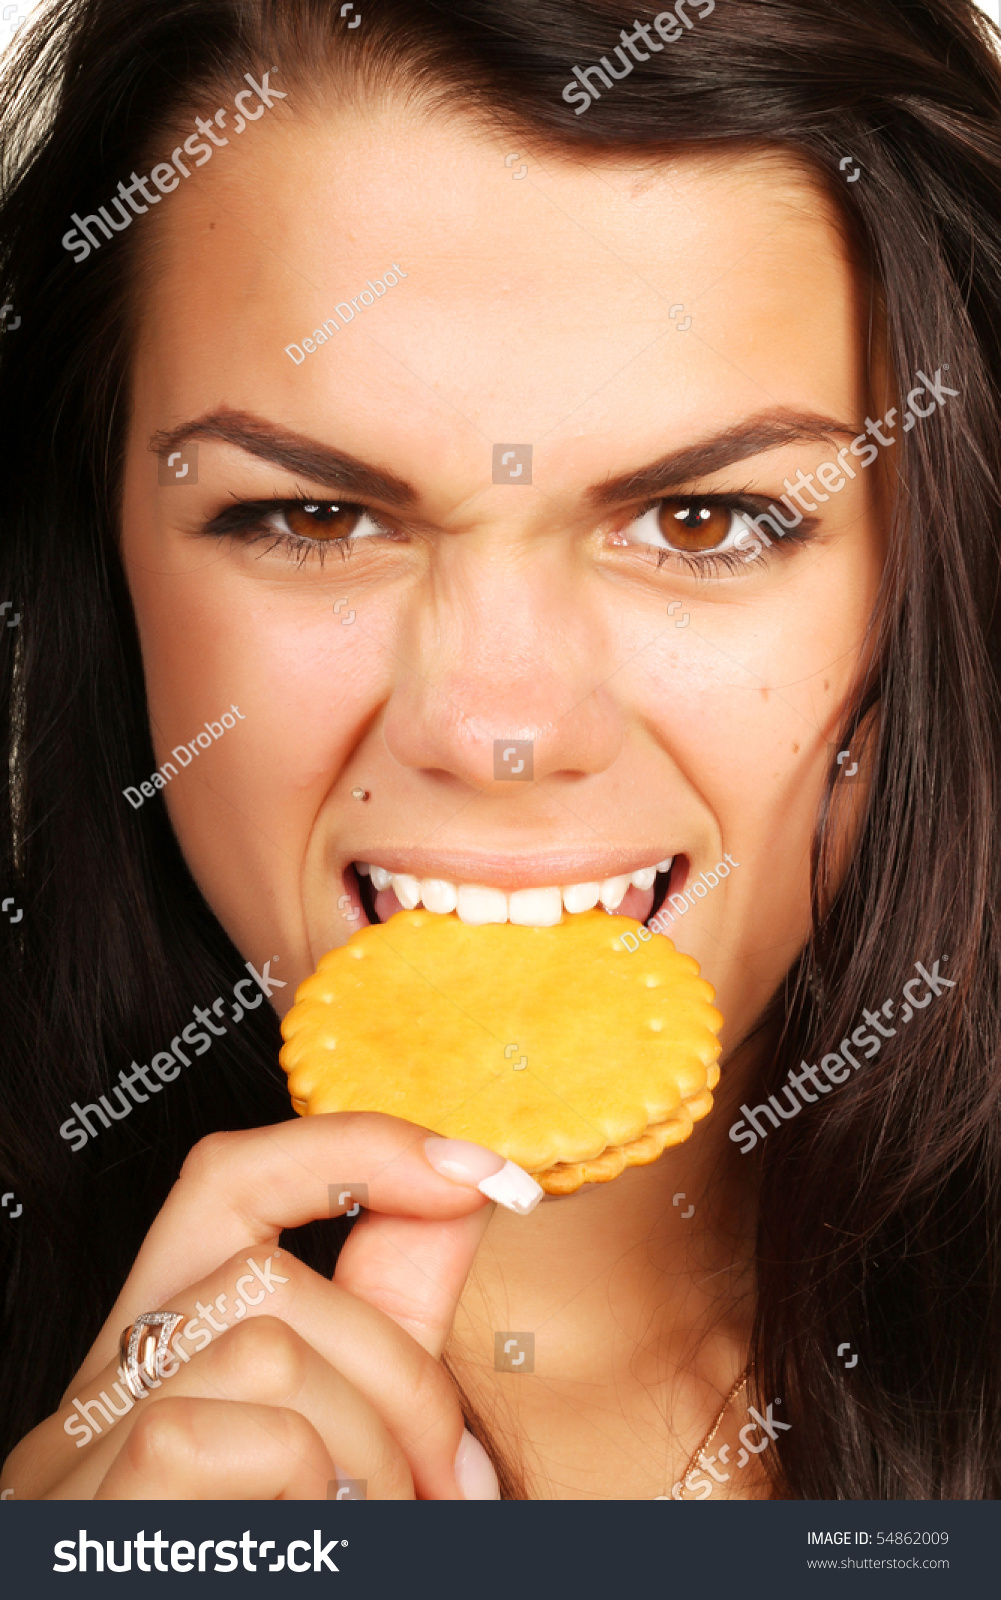 Woman eating cookie with anger #54862009